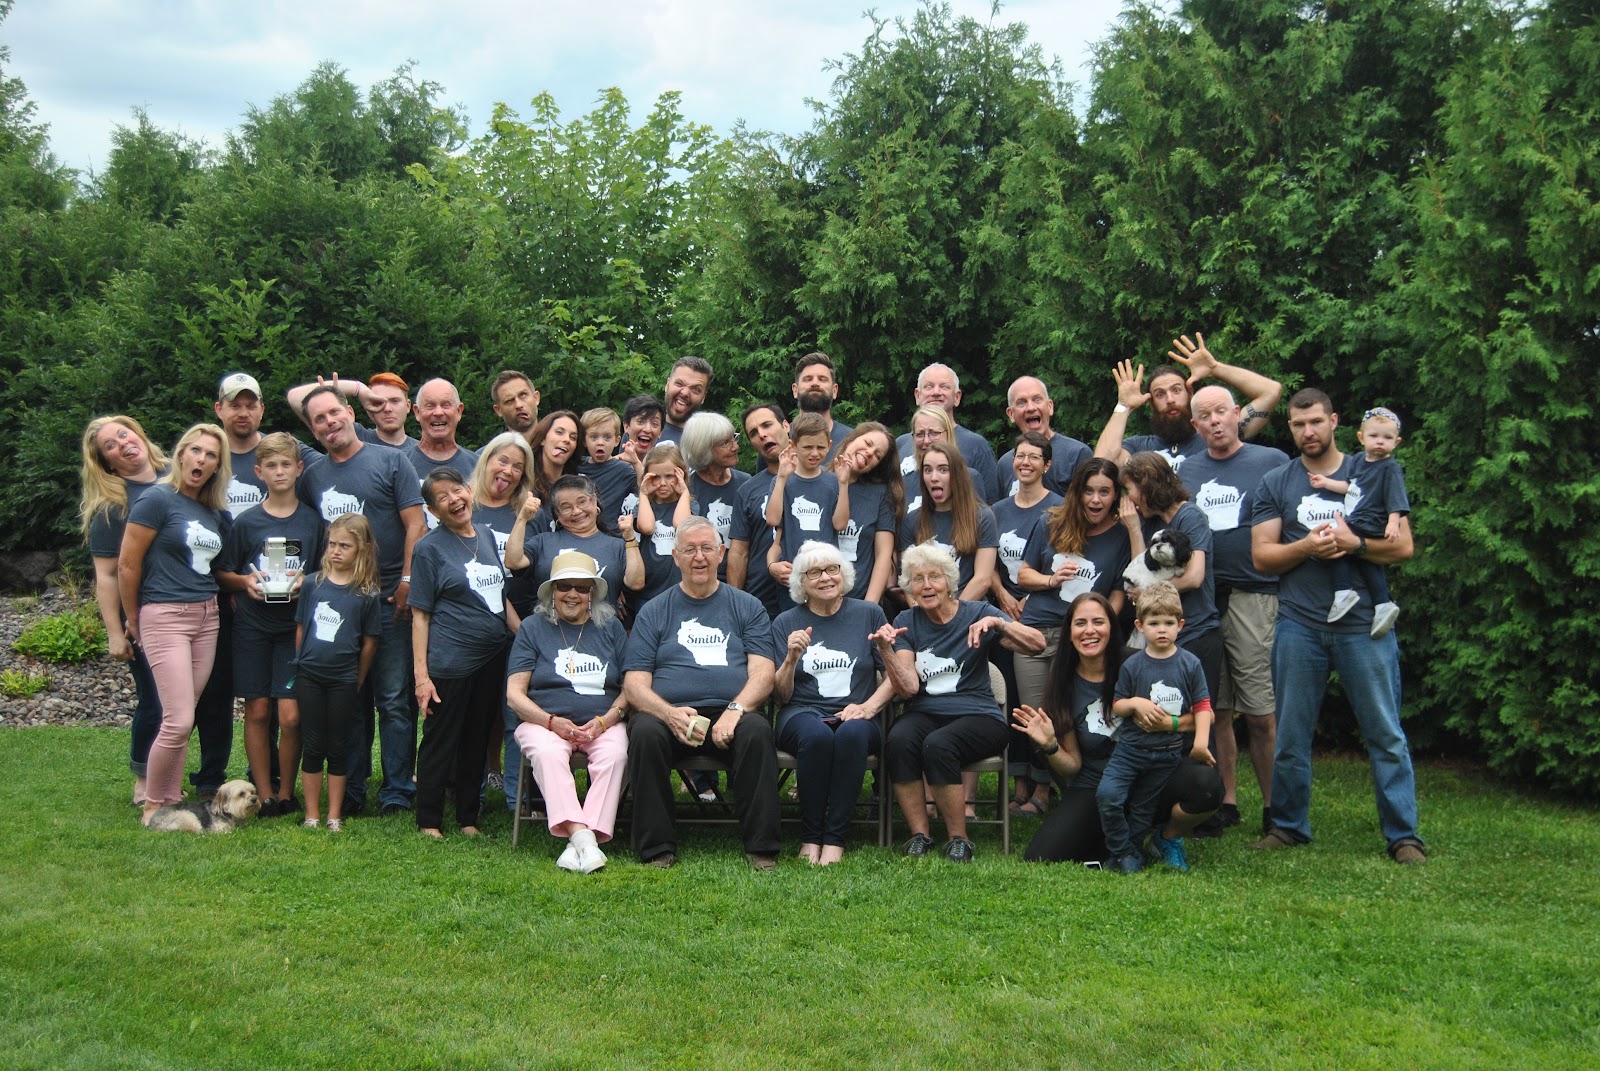 large family lined up for "crazy photo" at family reunion.